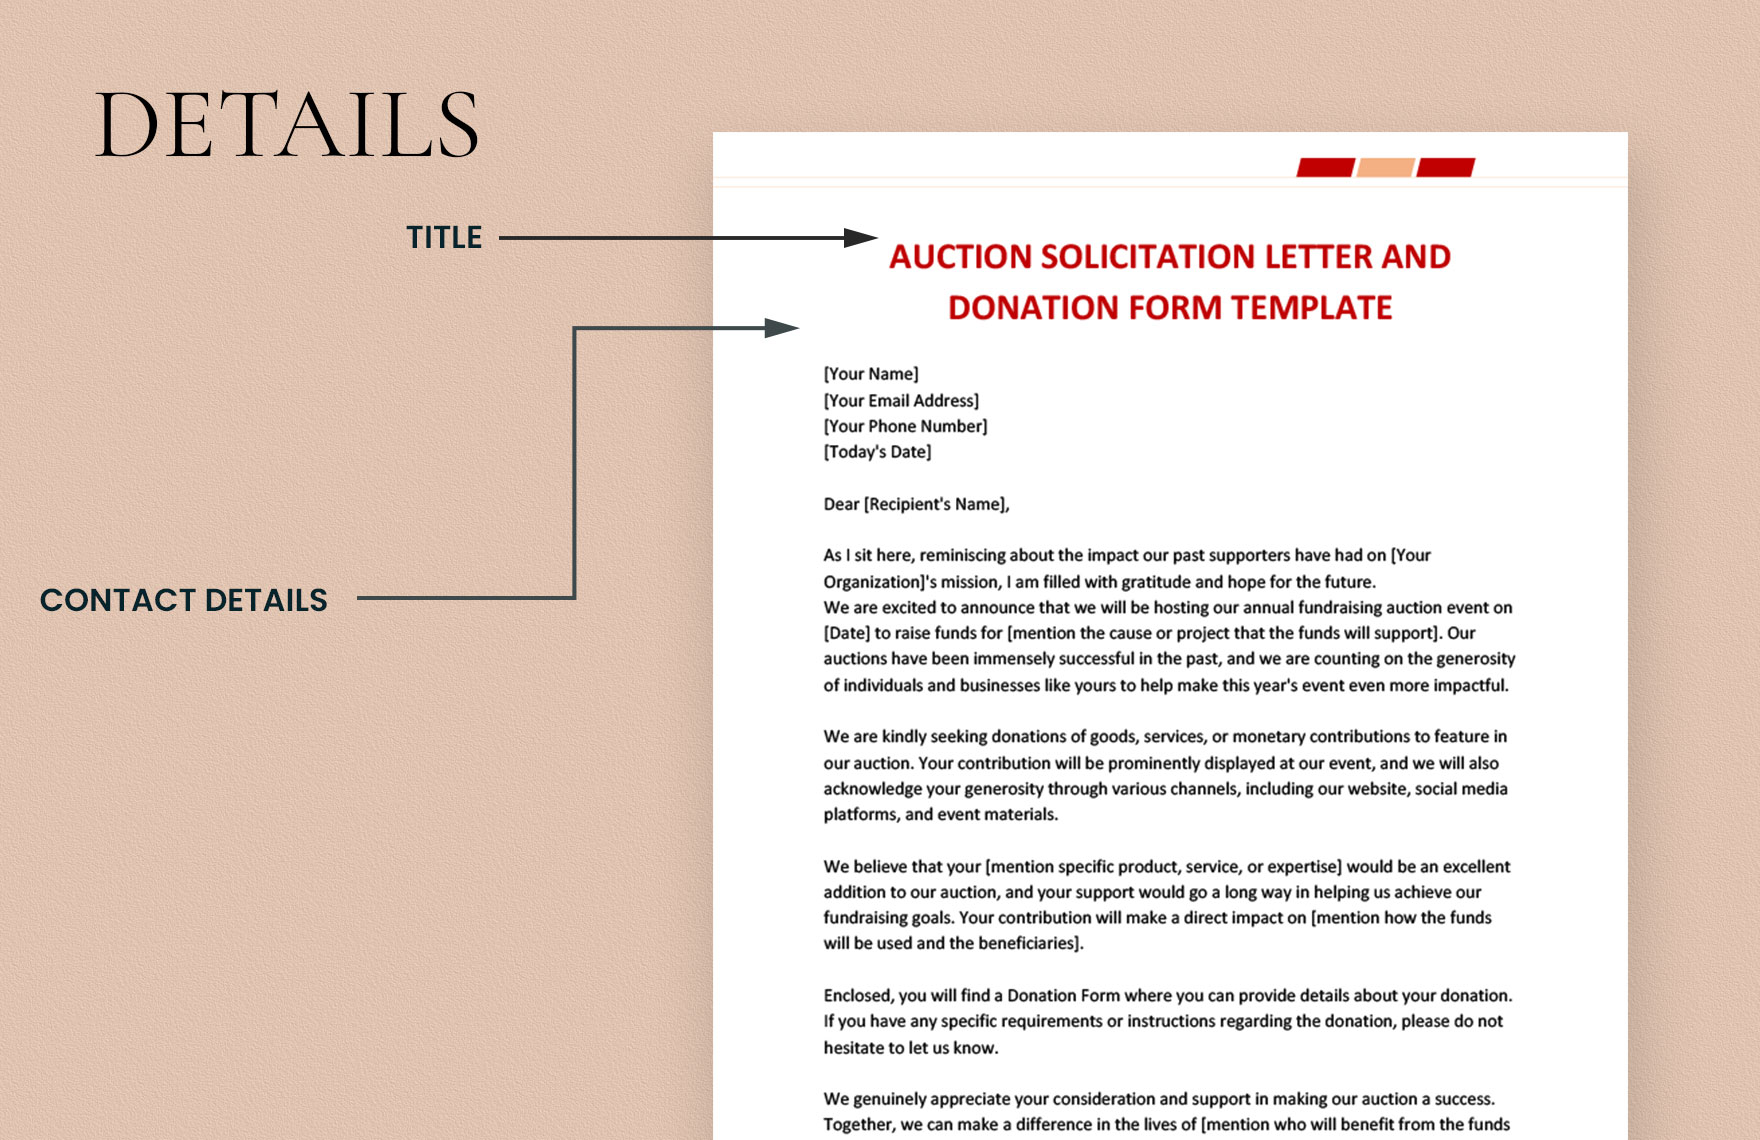 Auction Solicitation Letter and Donation Form Template